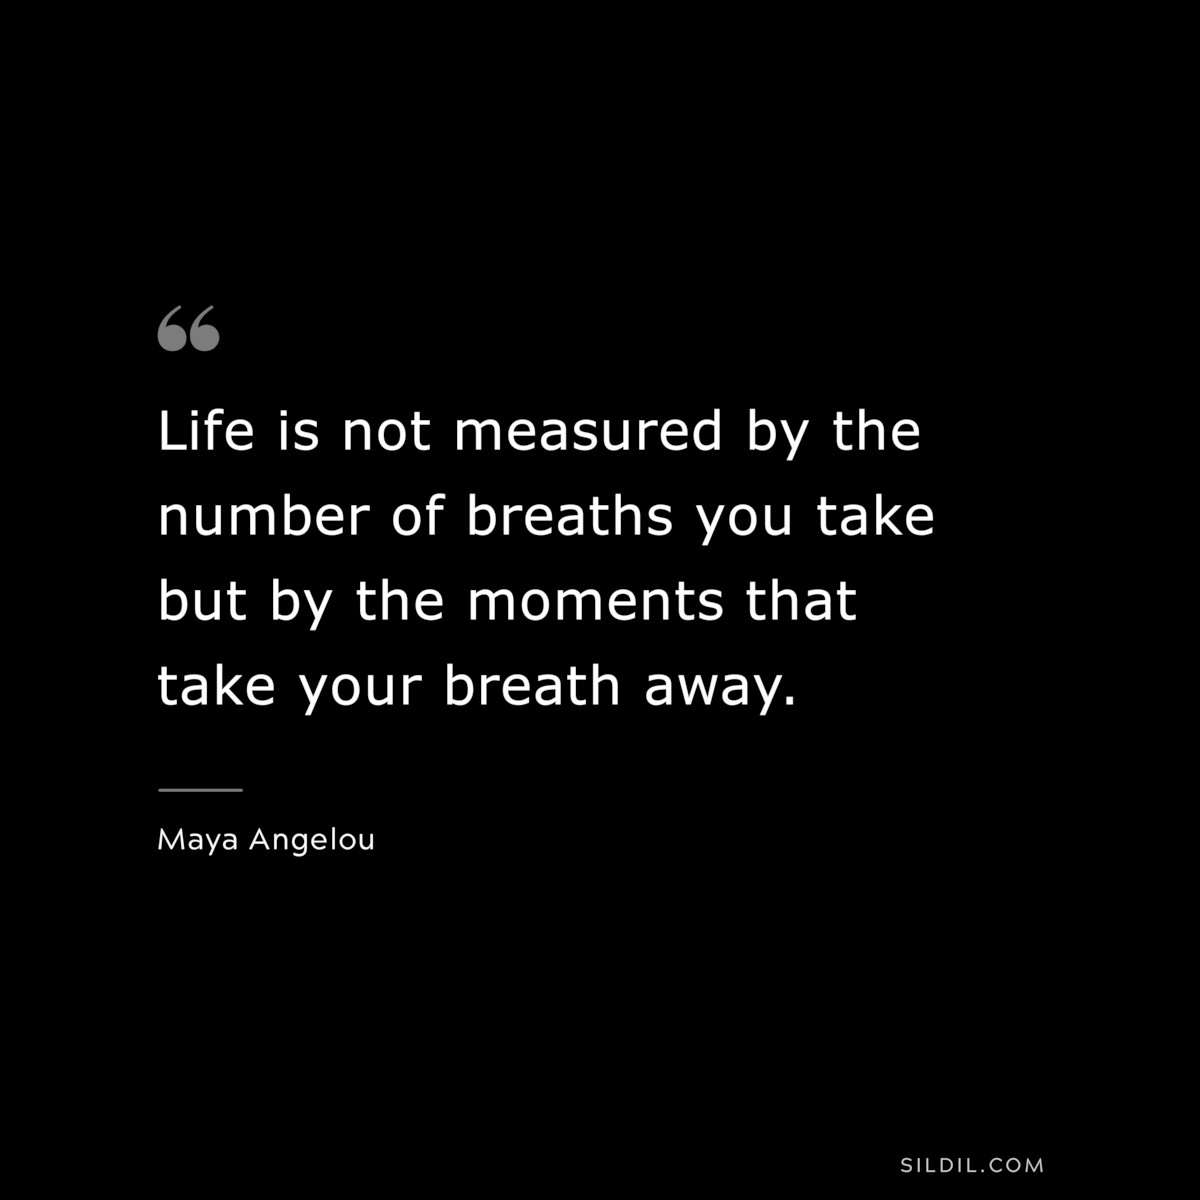 Life is not measured by the number of breaths you take but by the moments that take your breath away. ― Maya Angelou